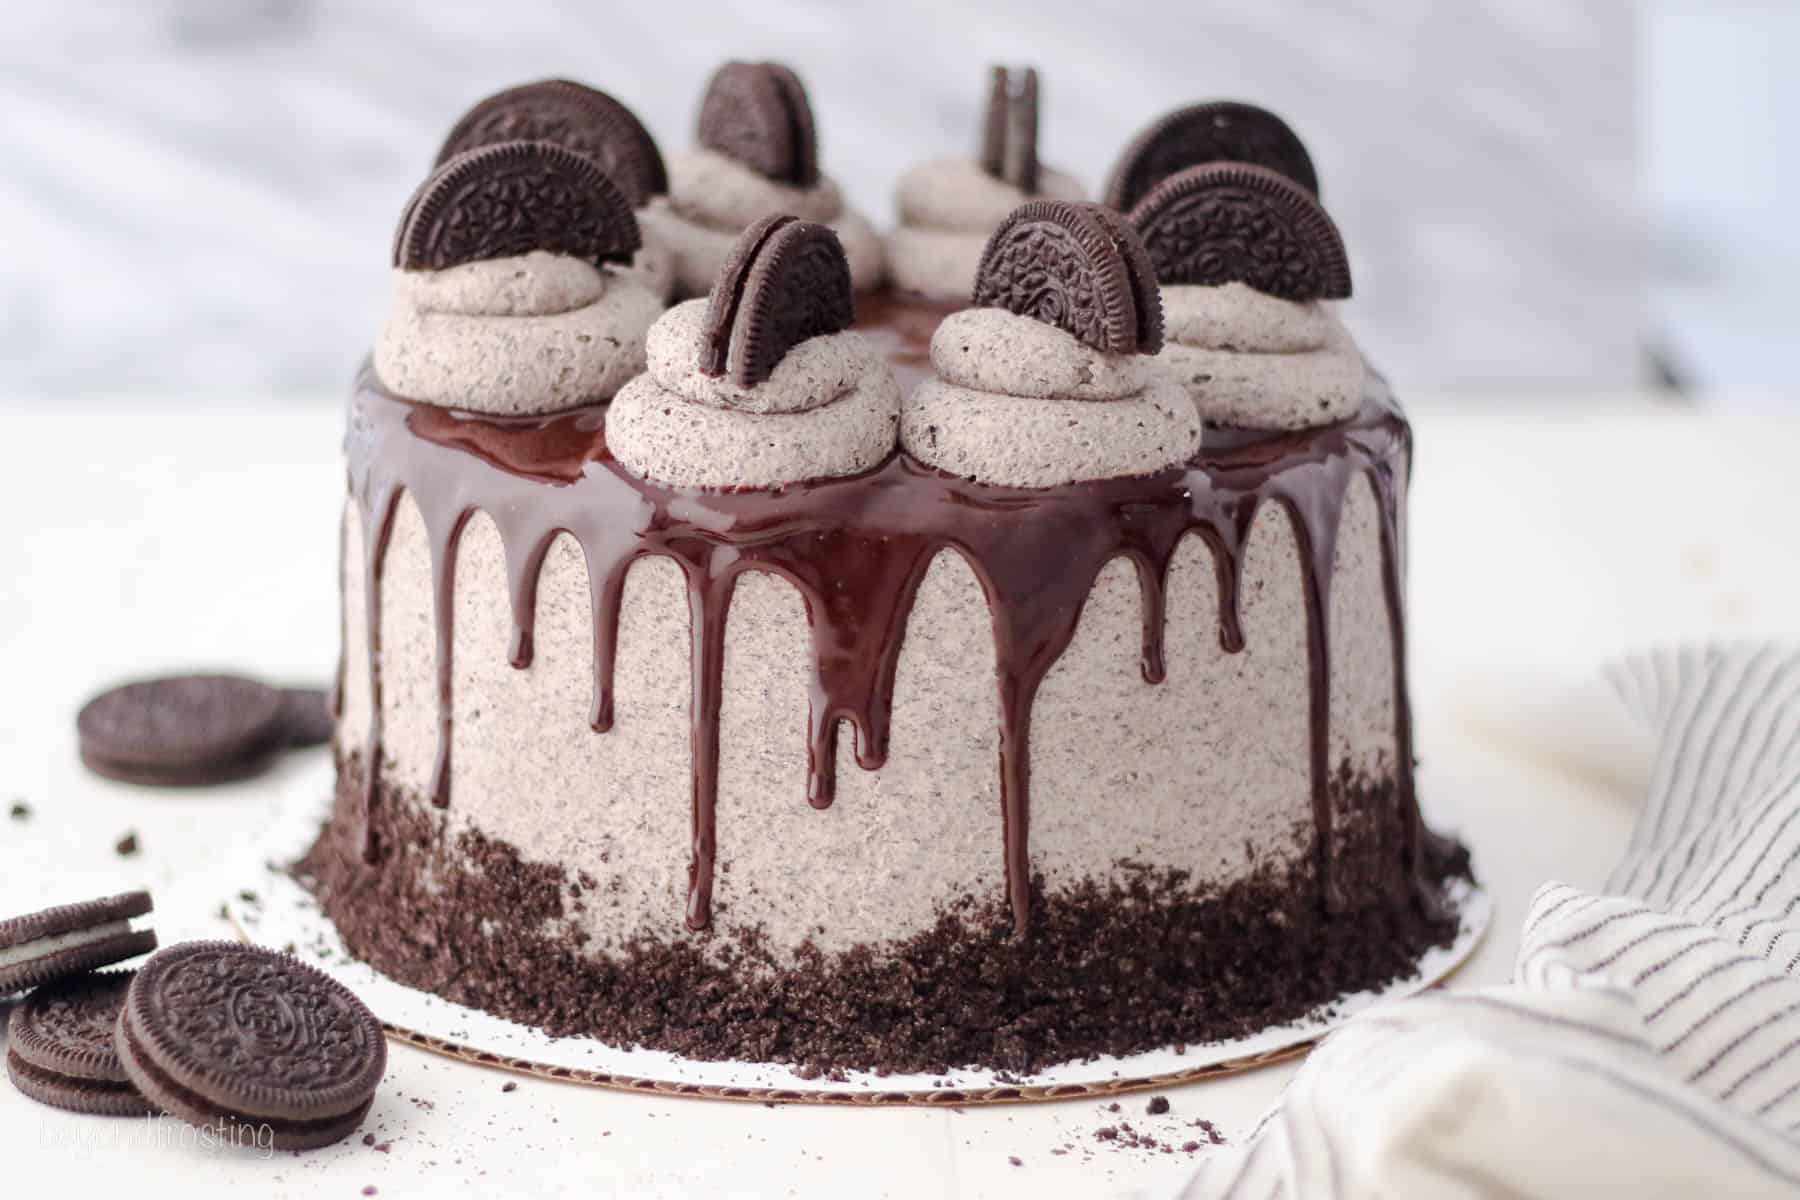 Oreo Cookies and Cream Cake | Beyond Frosting